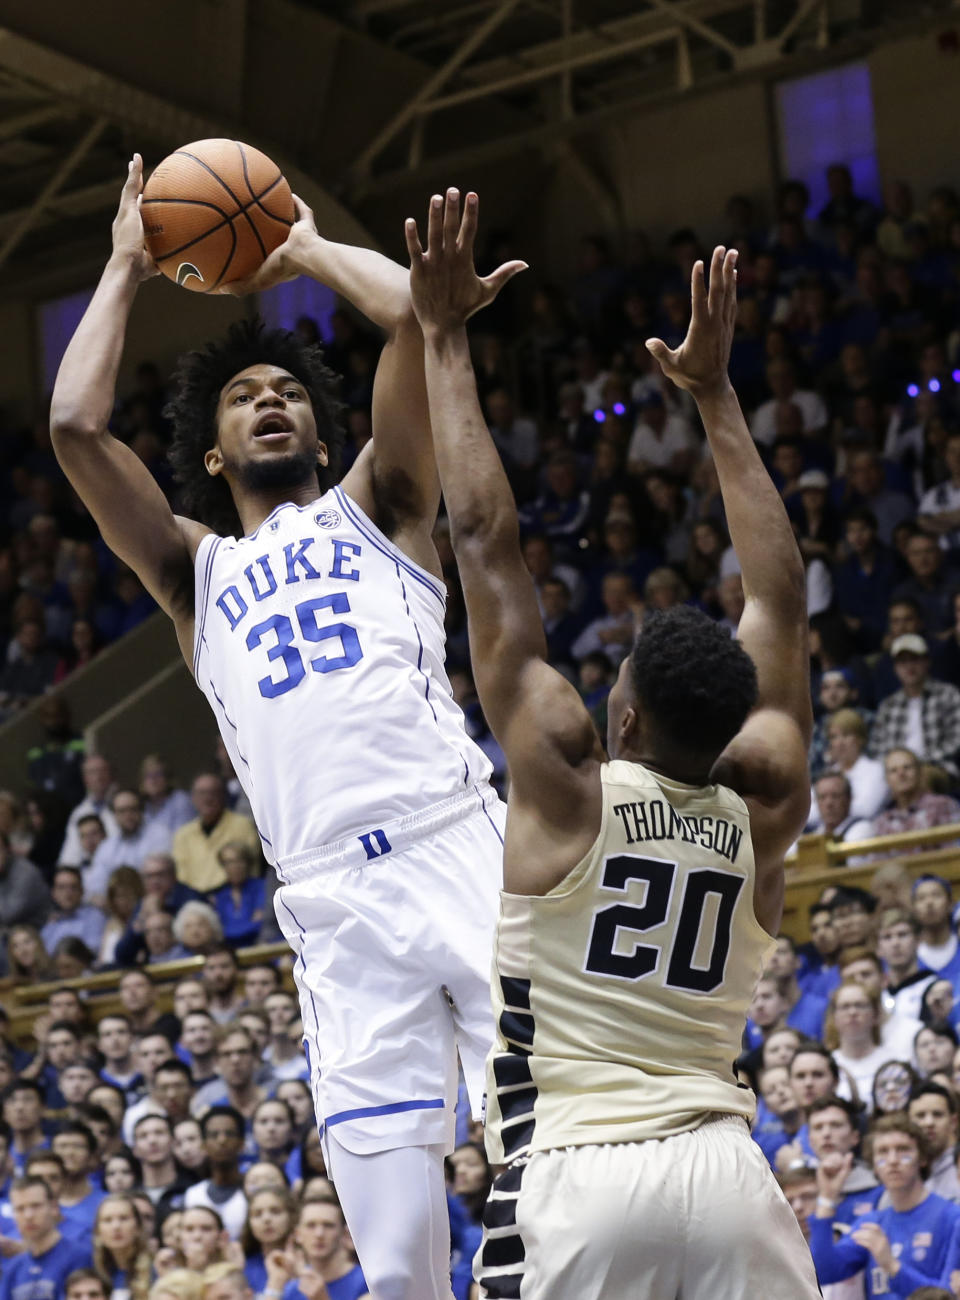 Bagley’s lack of shooting range will be a factor for NBA teams during the pre-draft evaluation process. (AP)